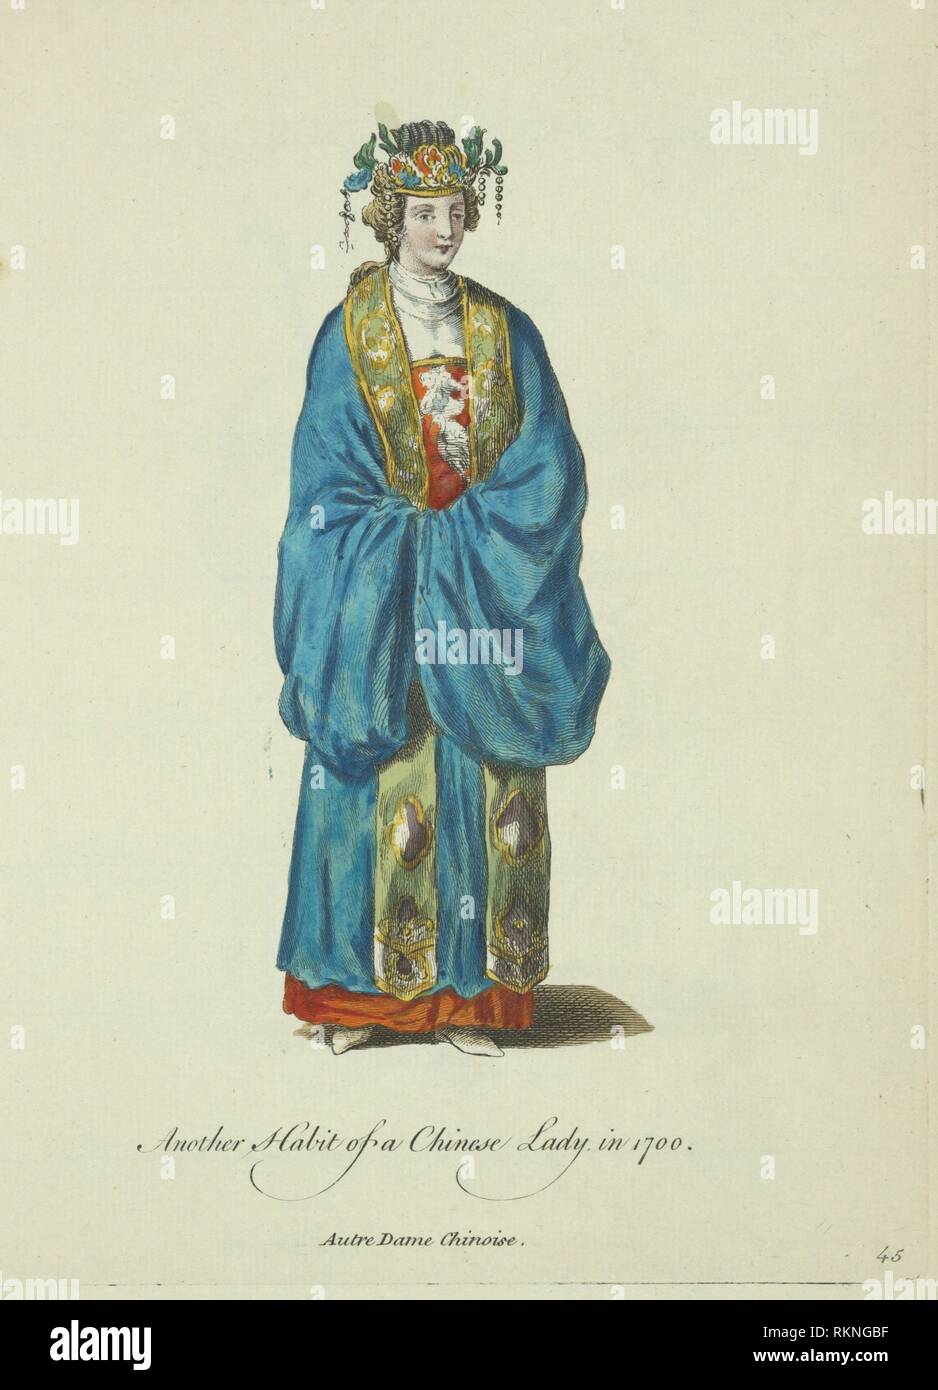 Another habit of a Chinese lady in 1700. Autre dame Chinoise. Du ...